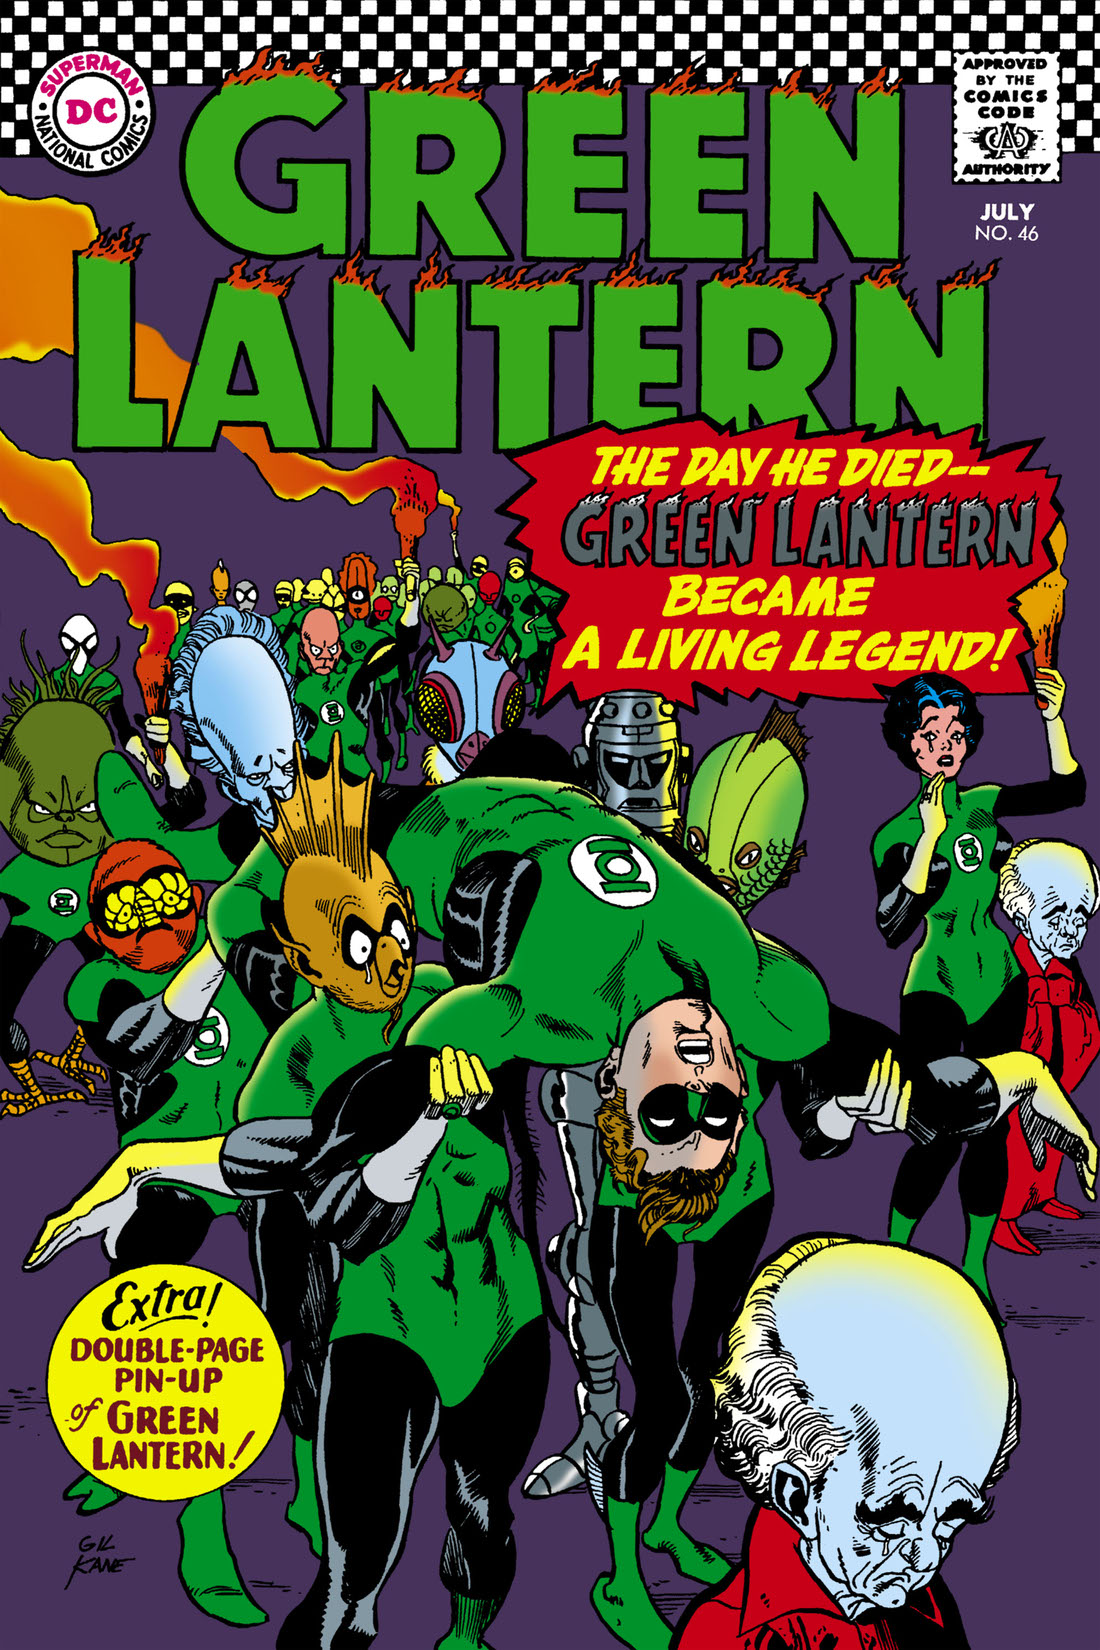 Green Lantern (1960-) #46 preview images